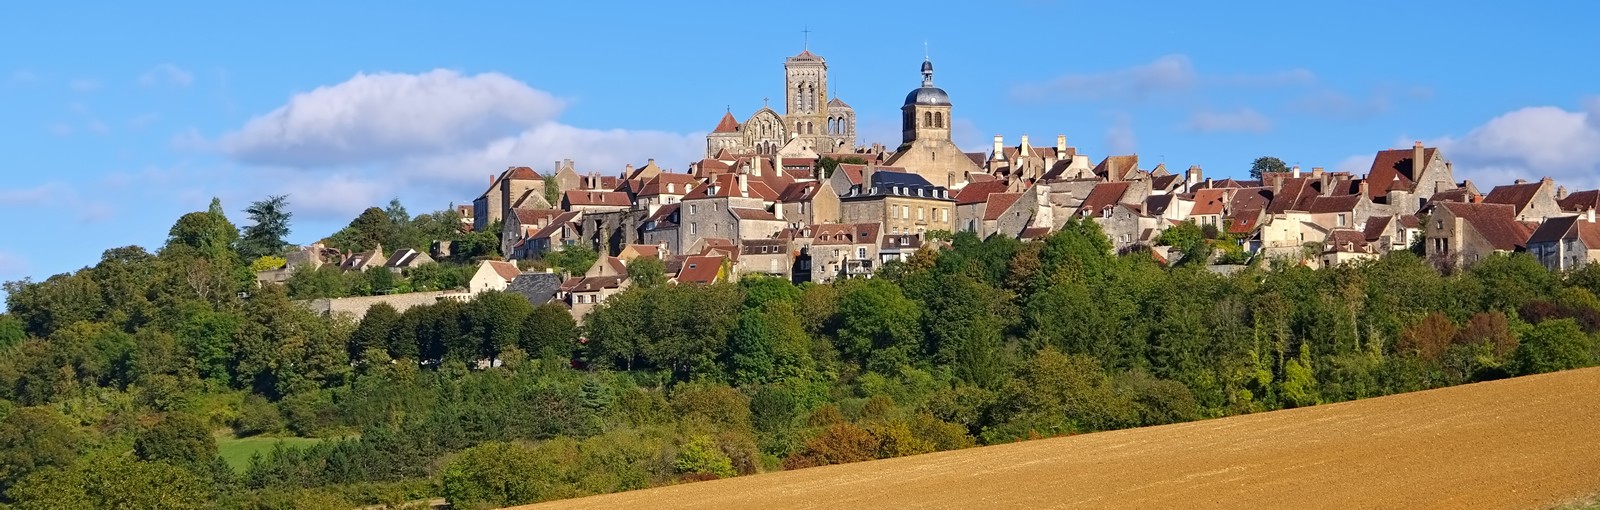 Tours Champagne - Burgundy – Berry - Multi-regional - Multiday tours from Paris